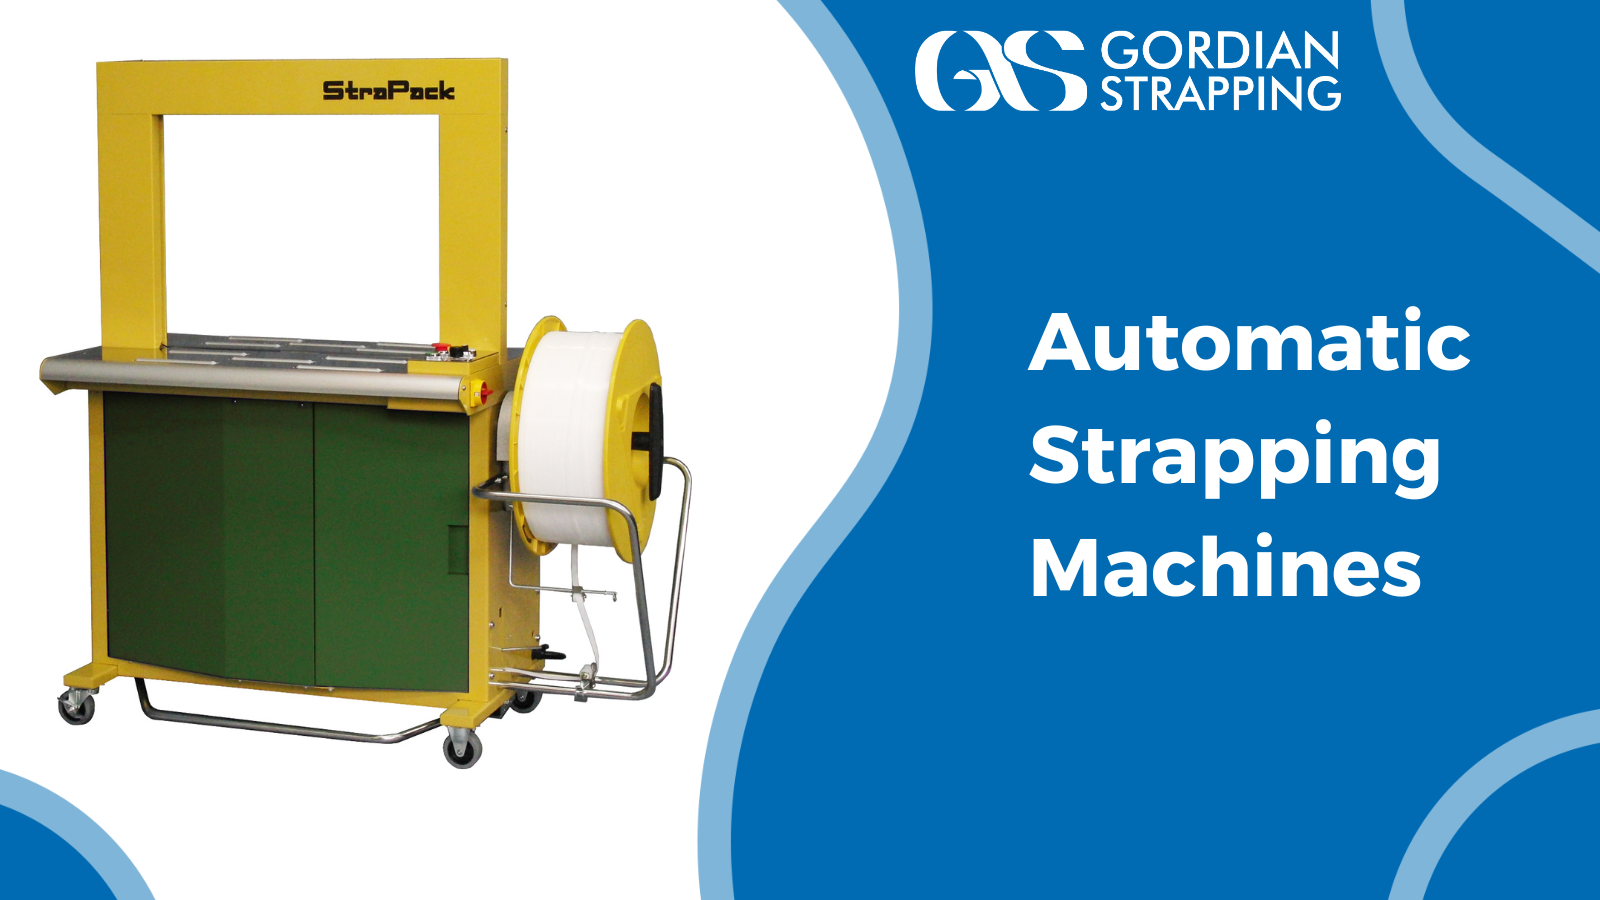 Pros and Cons of Automatic Strapping Machines